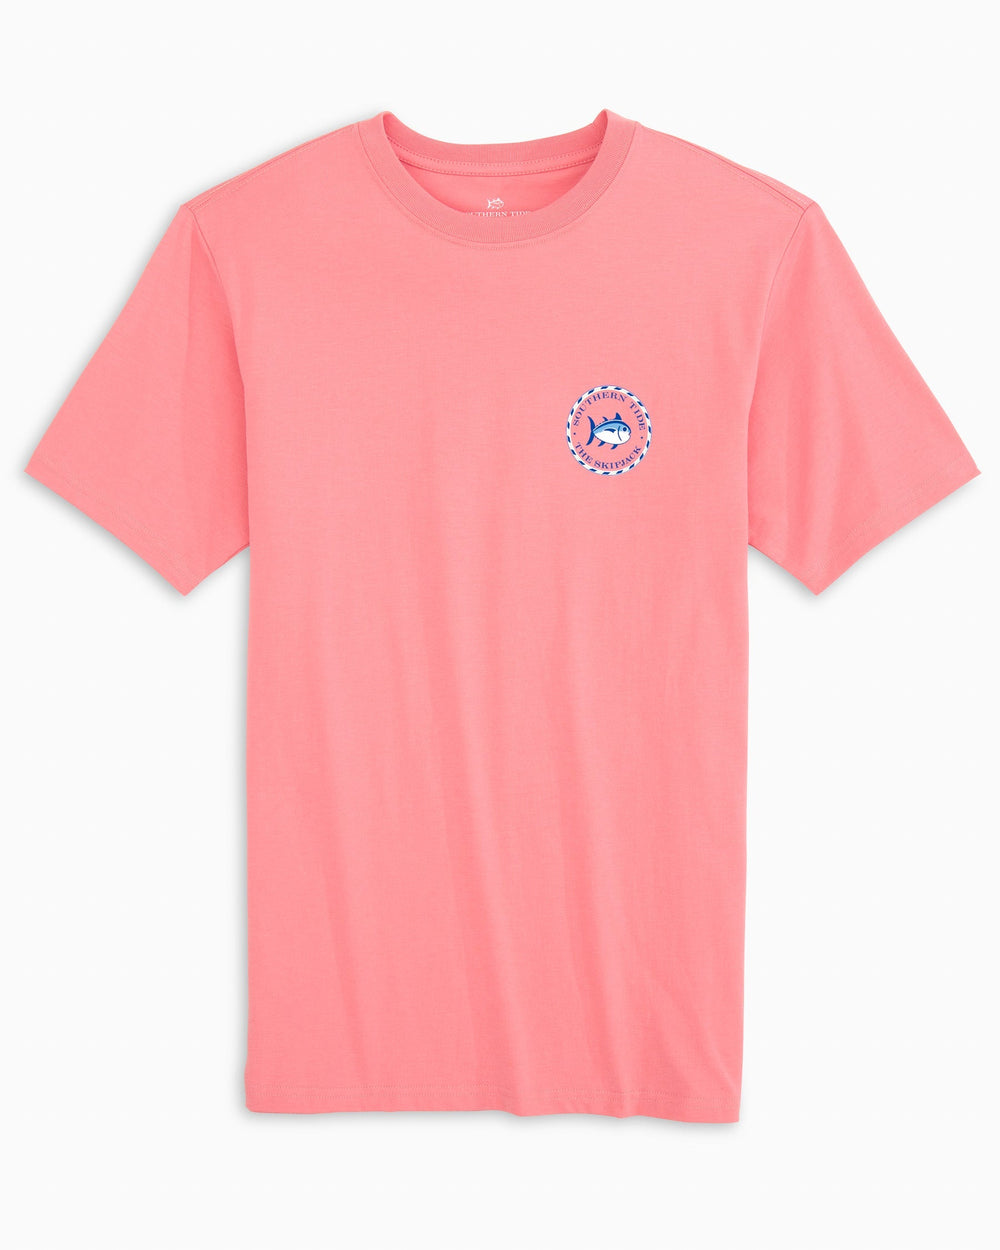 The model front view of the Women's Original Skipjack Medallion T-Shirt by Southern Tide - Citrus Punch